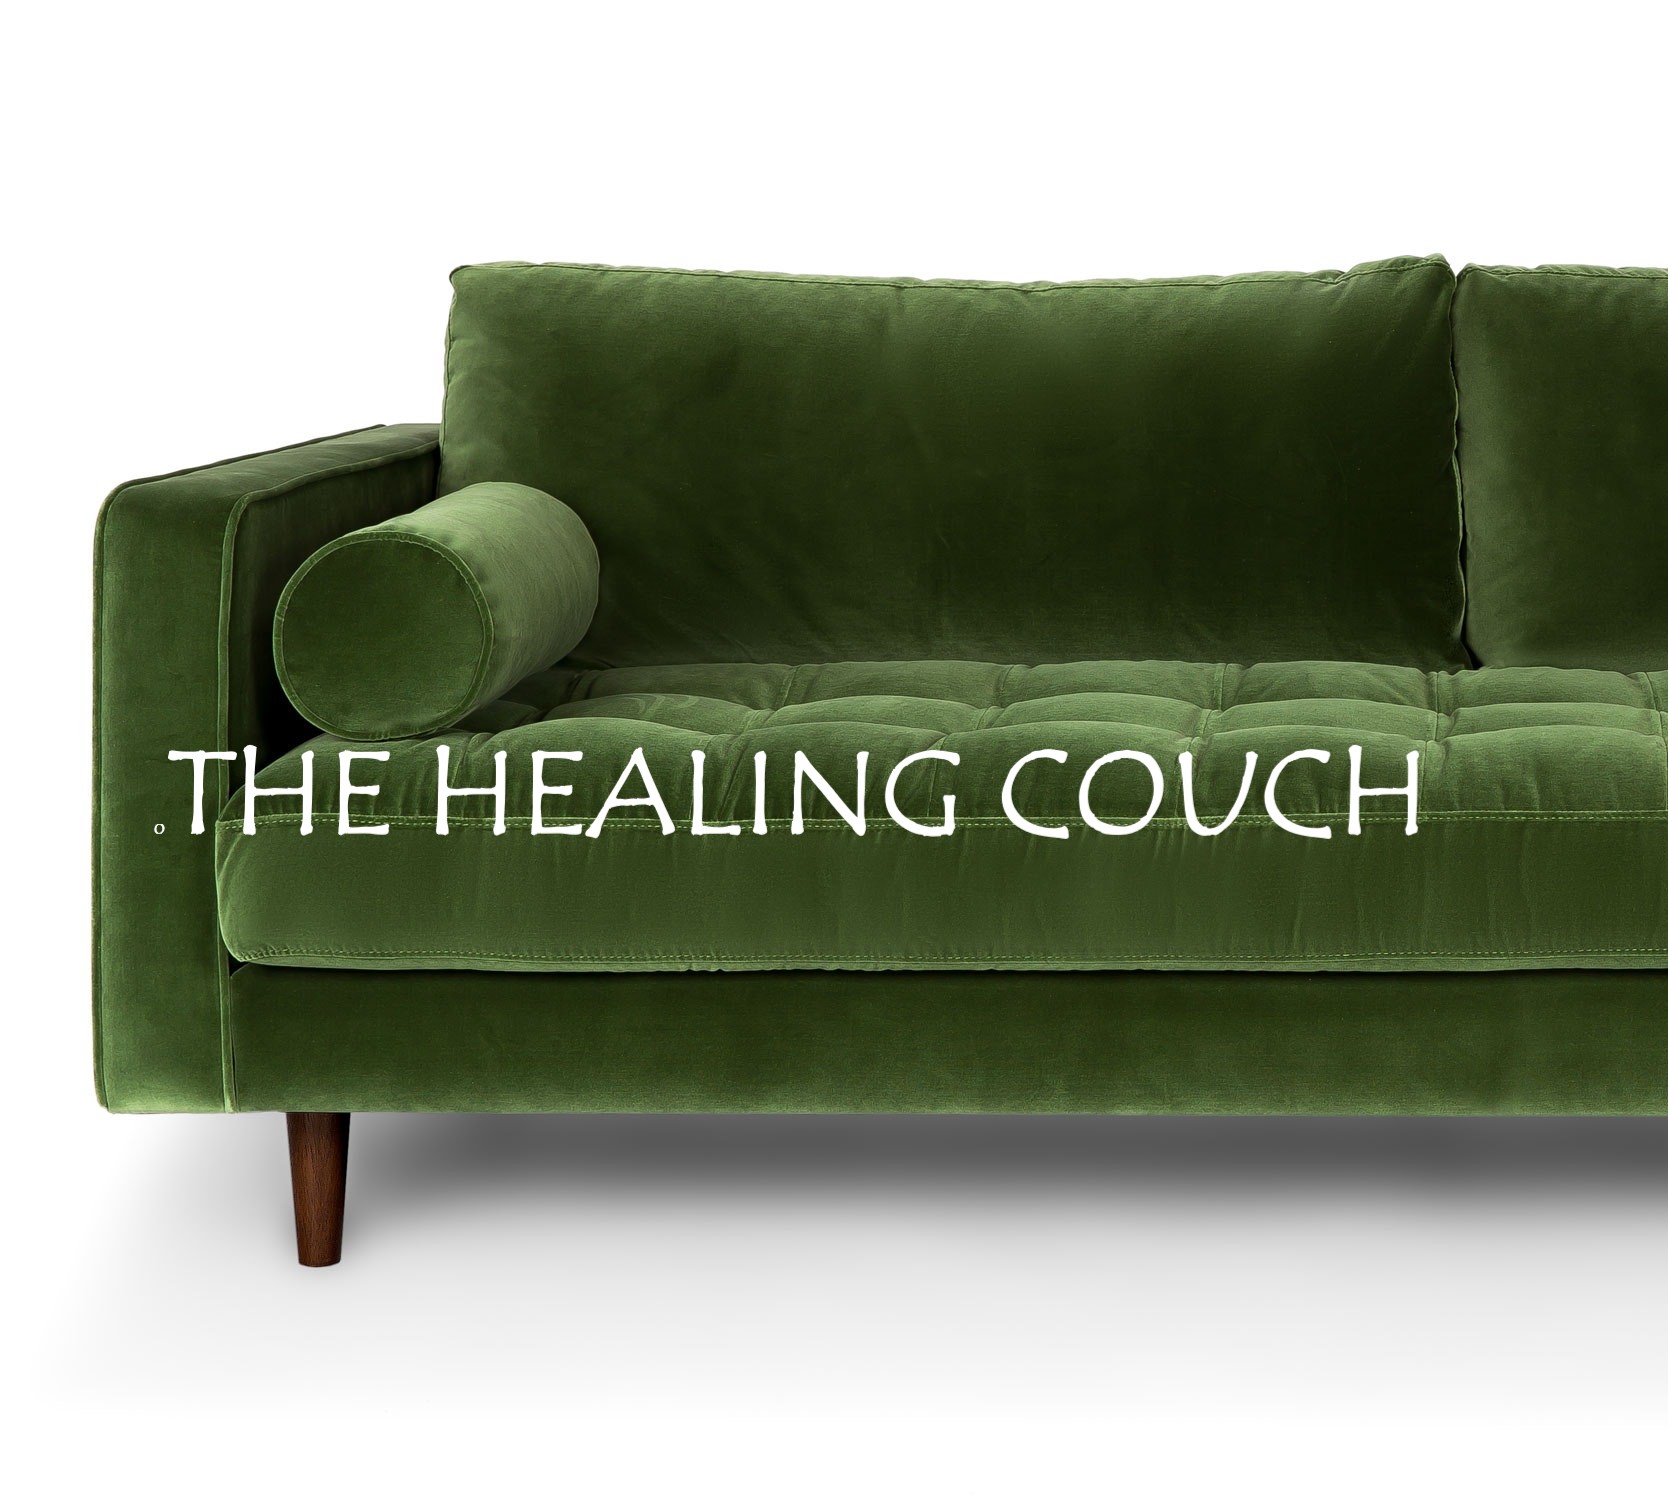 The Healing Couch